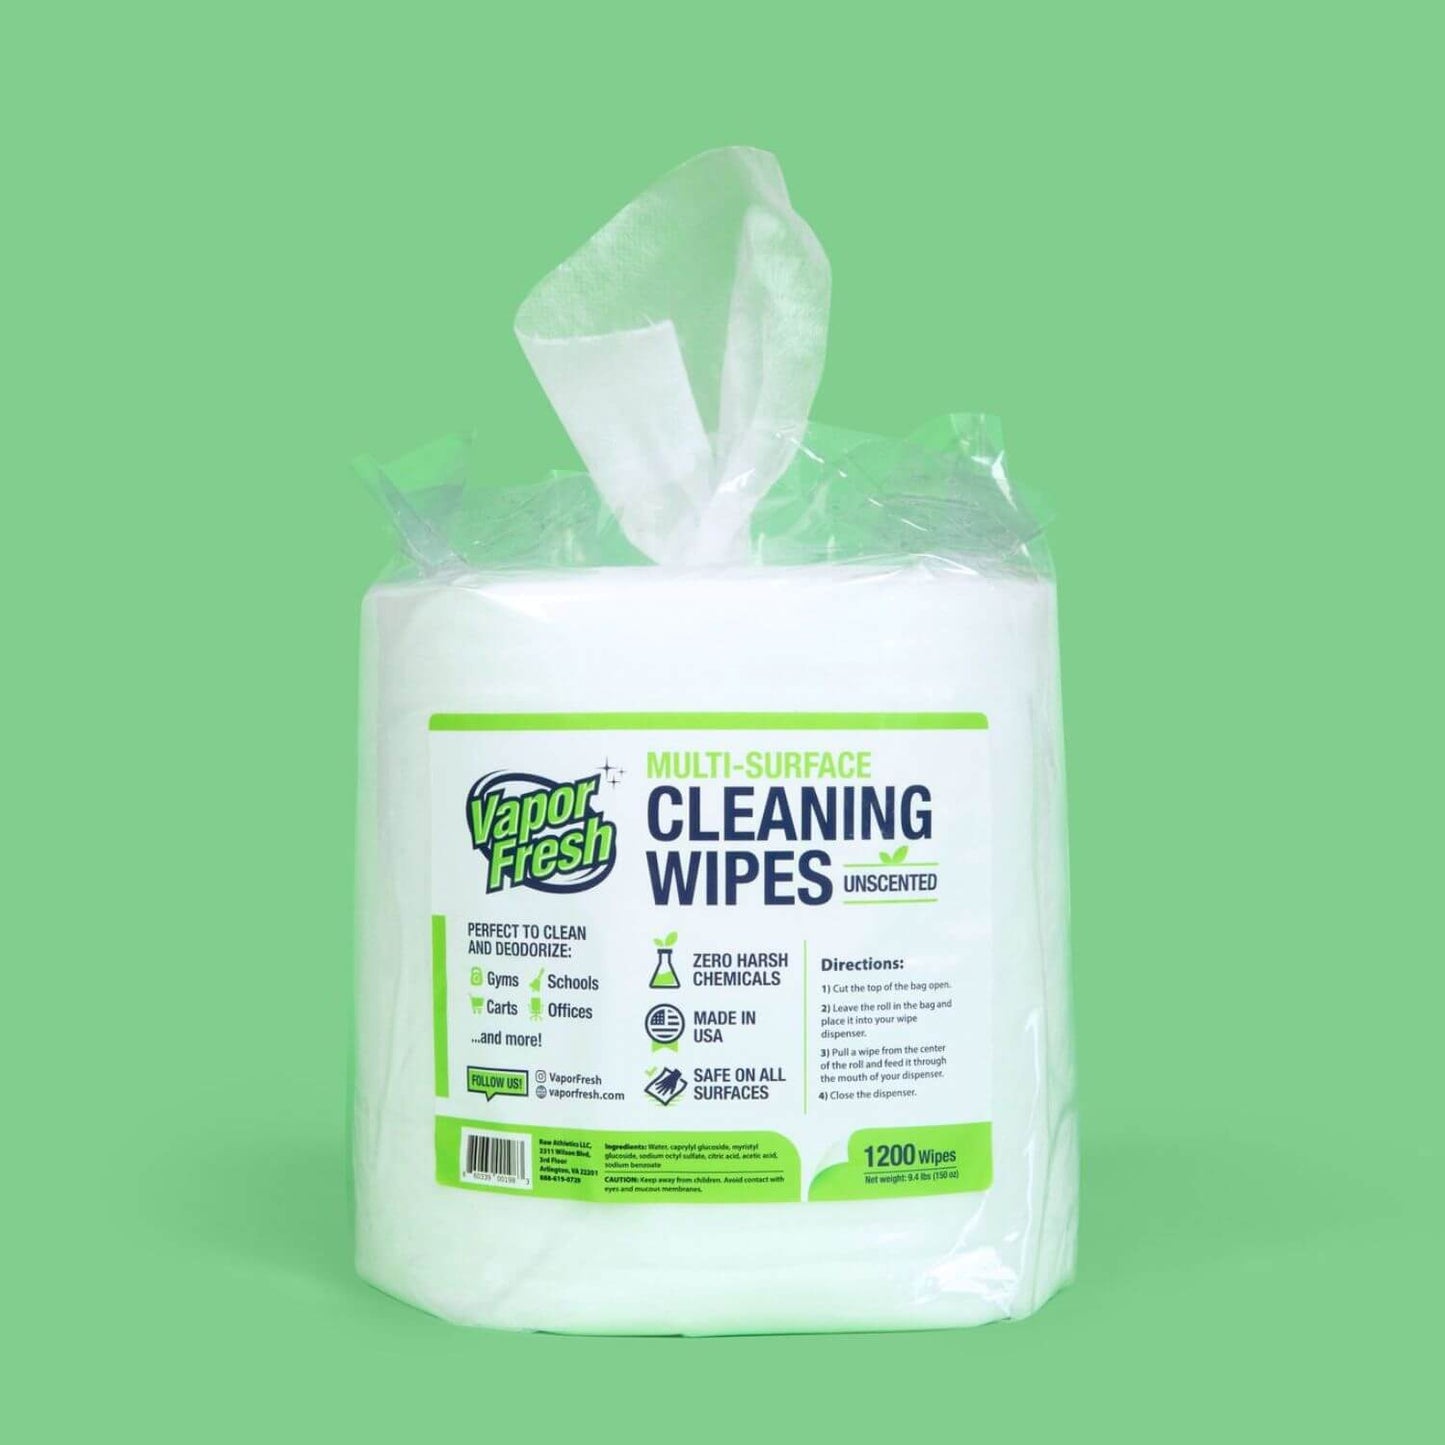 Vapor Fresh® Multi-Surface Cleaning Wipes